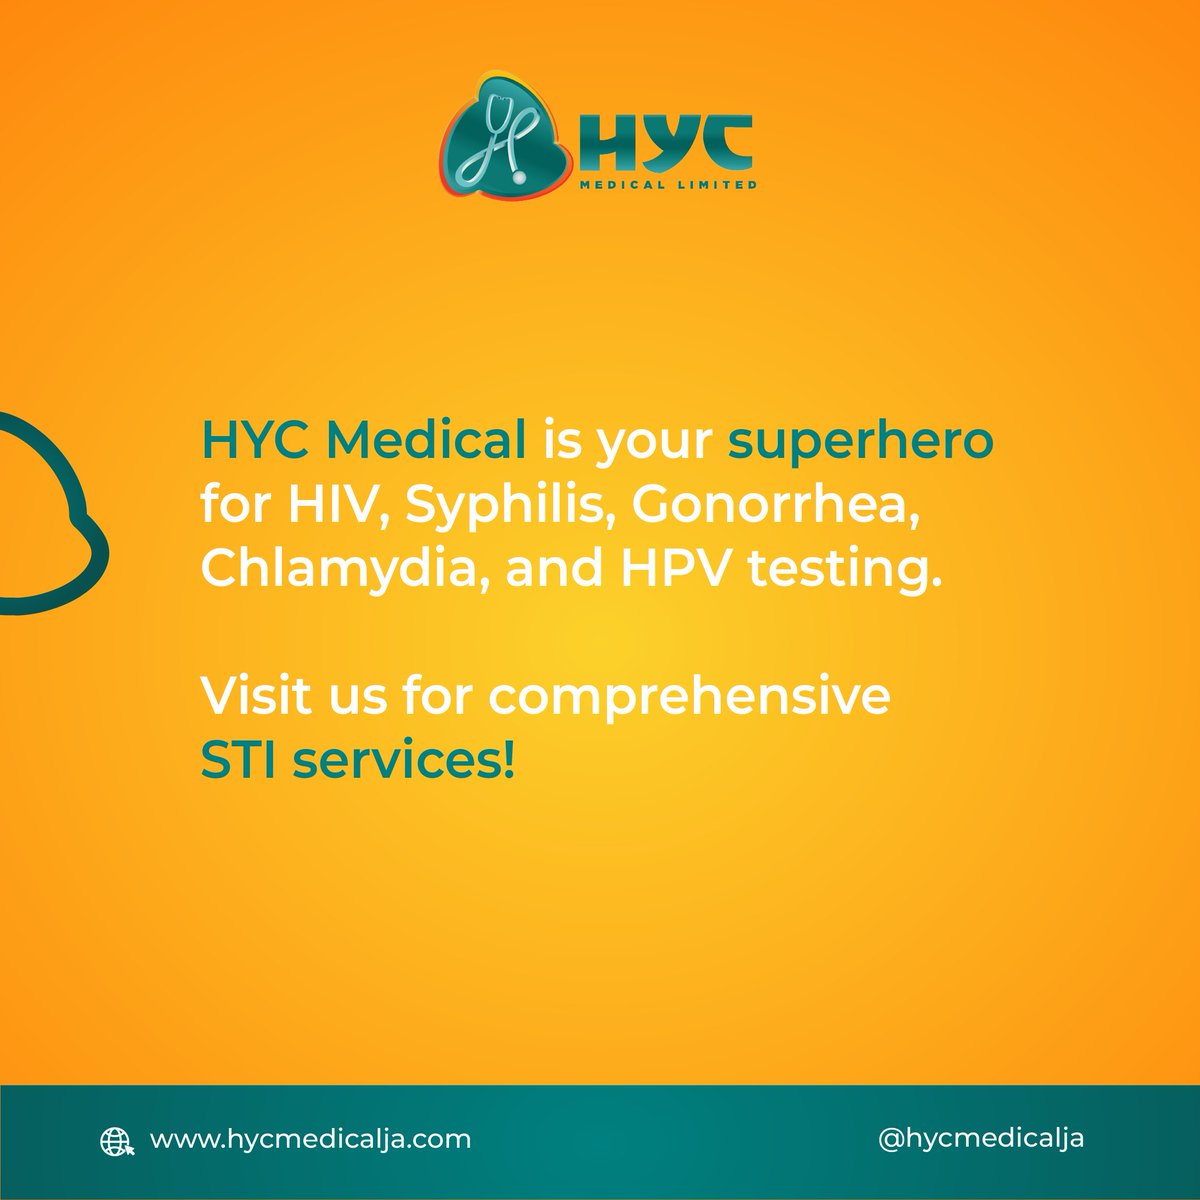 Heroes don't always wear capes; some wear white coats offering STI testing. At HYC Medical, we're your superheroes for HIV, Syphilis, Gonorrhea, Chlamydia, and HPV testing. Visit us for comprehensive STI services! #HYCMedical #STItesting #HealthHeroes